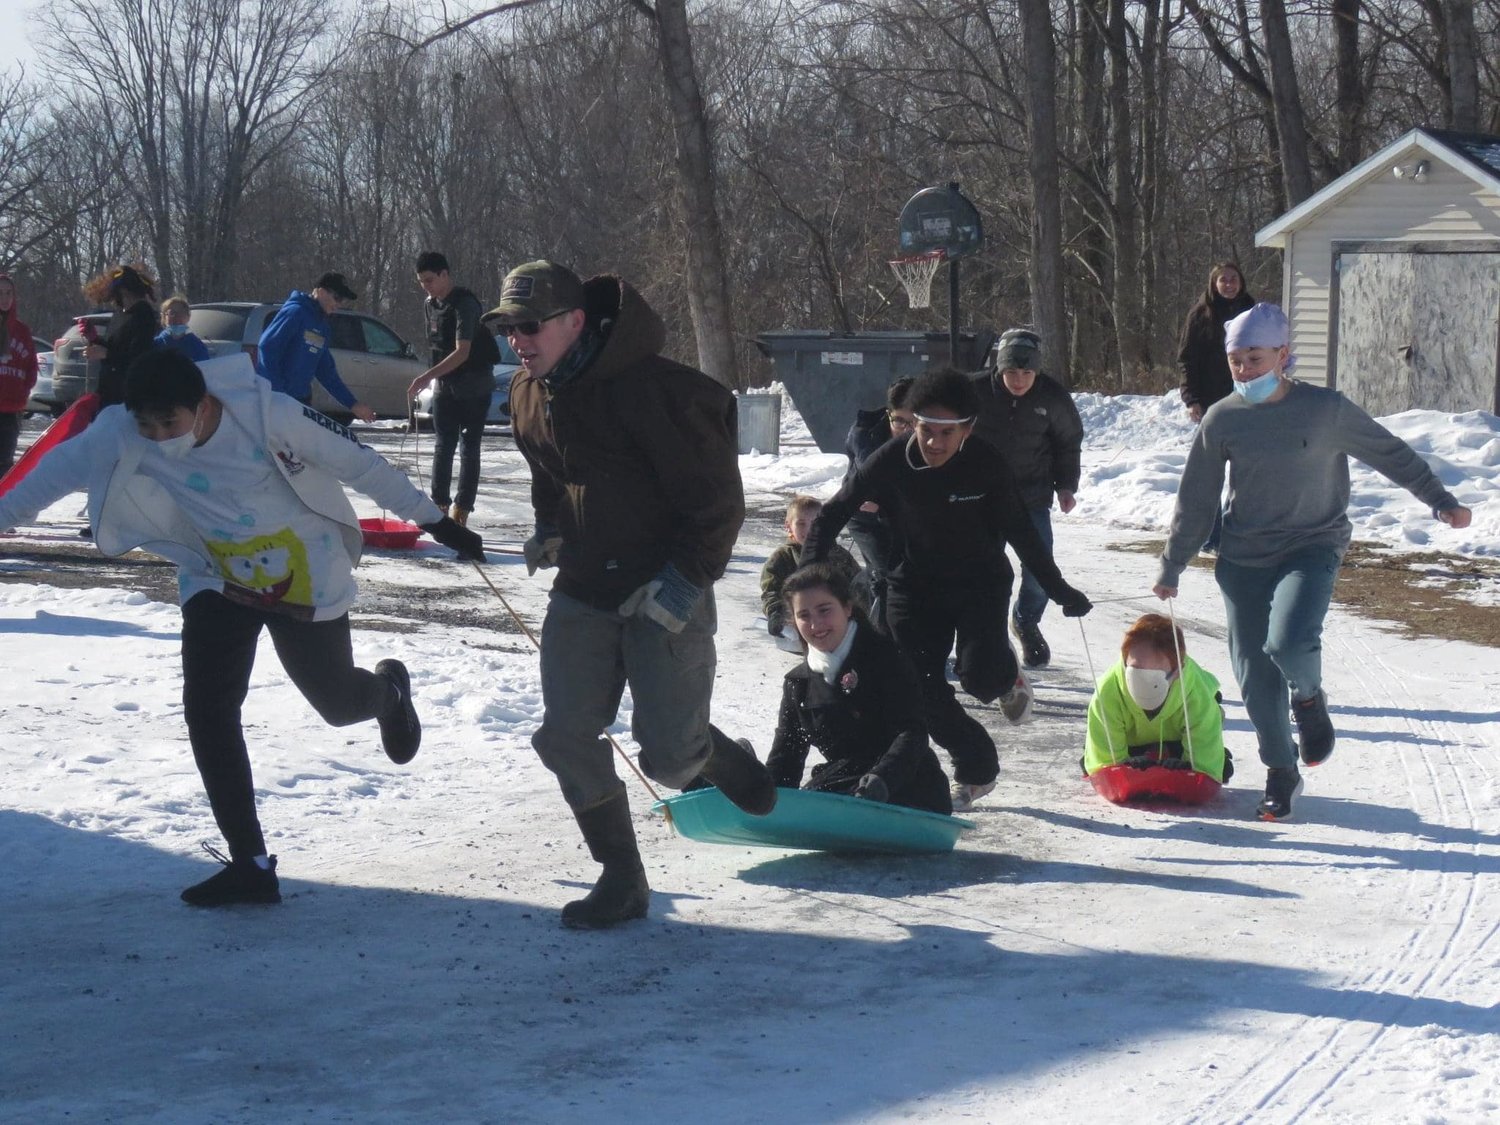 MUSH? — Fun-filled sled races were among the activities last week at the Holy Cross Academy, 4020 Barrington Road in Oneida Castle, as students celebrated with a host of events and activities.